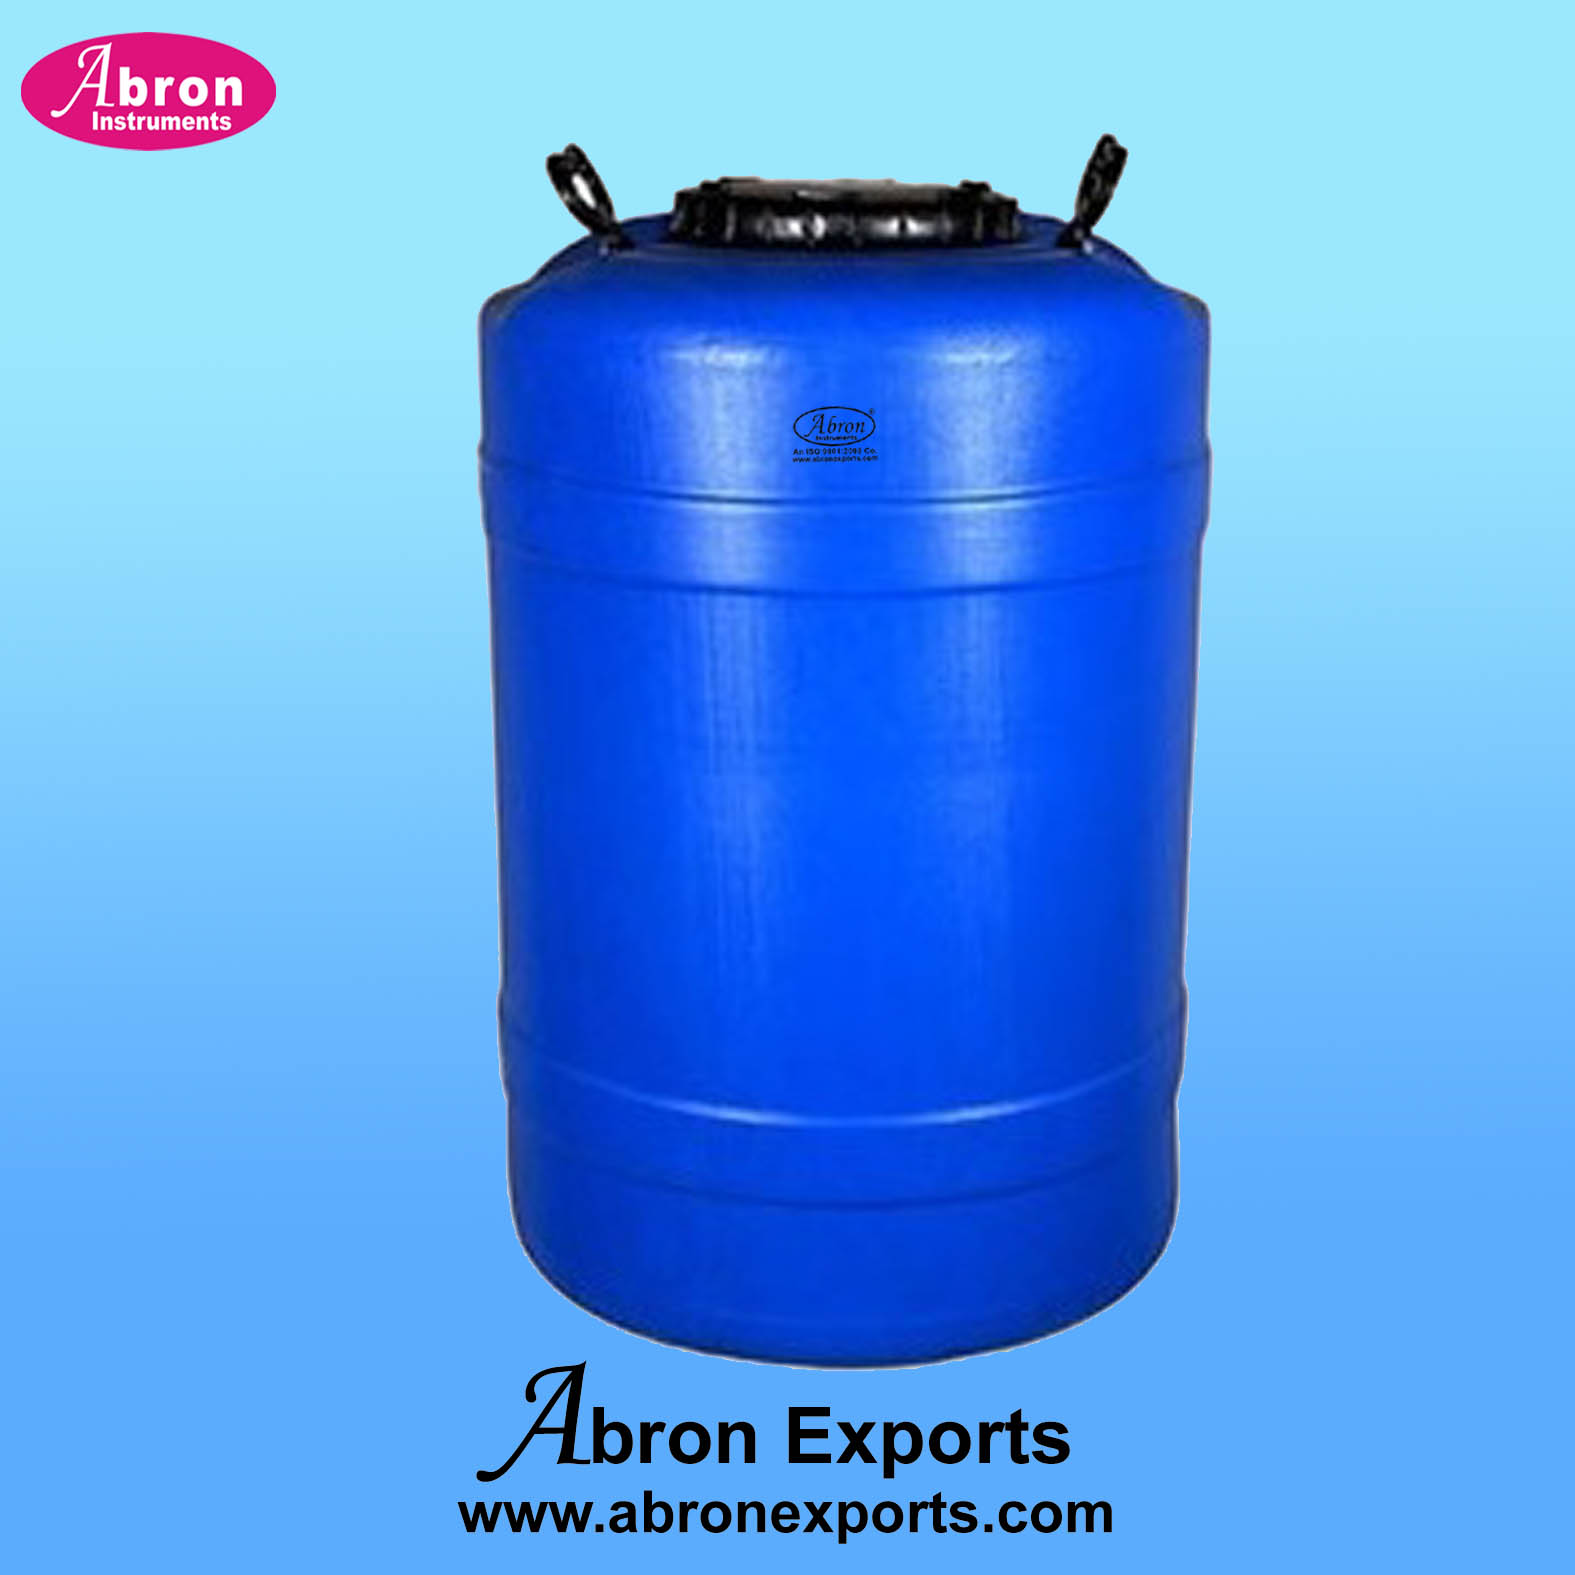 Containers Plastic 100 liters Wide Mouth Screw Cap Blue Heavy Abron AT-9515-100N